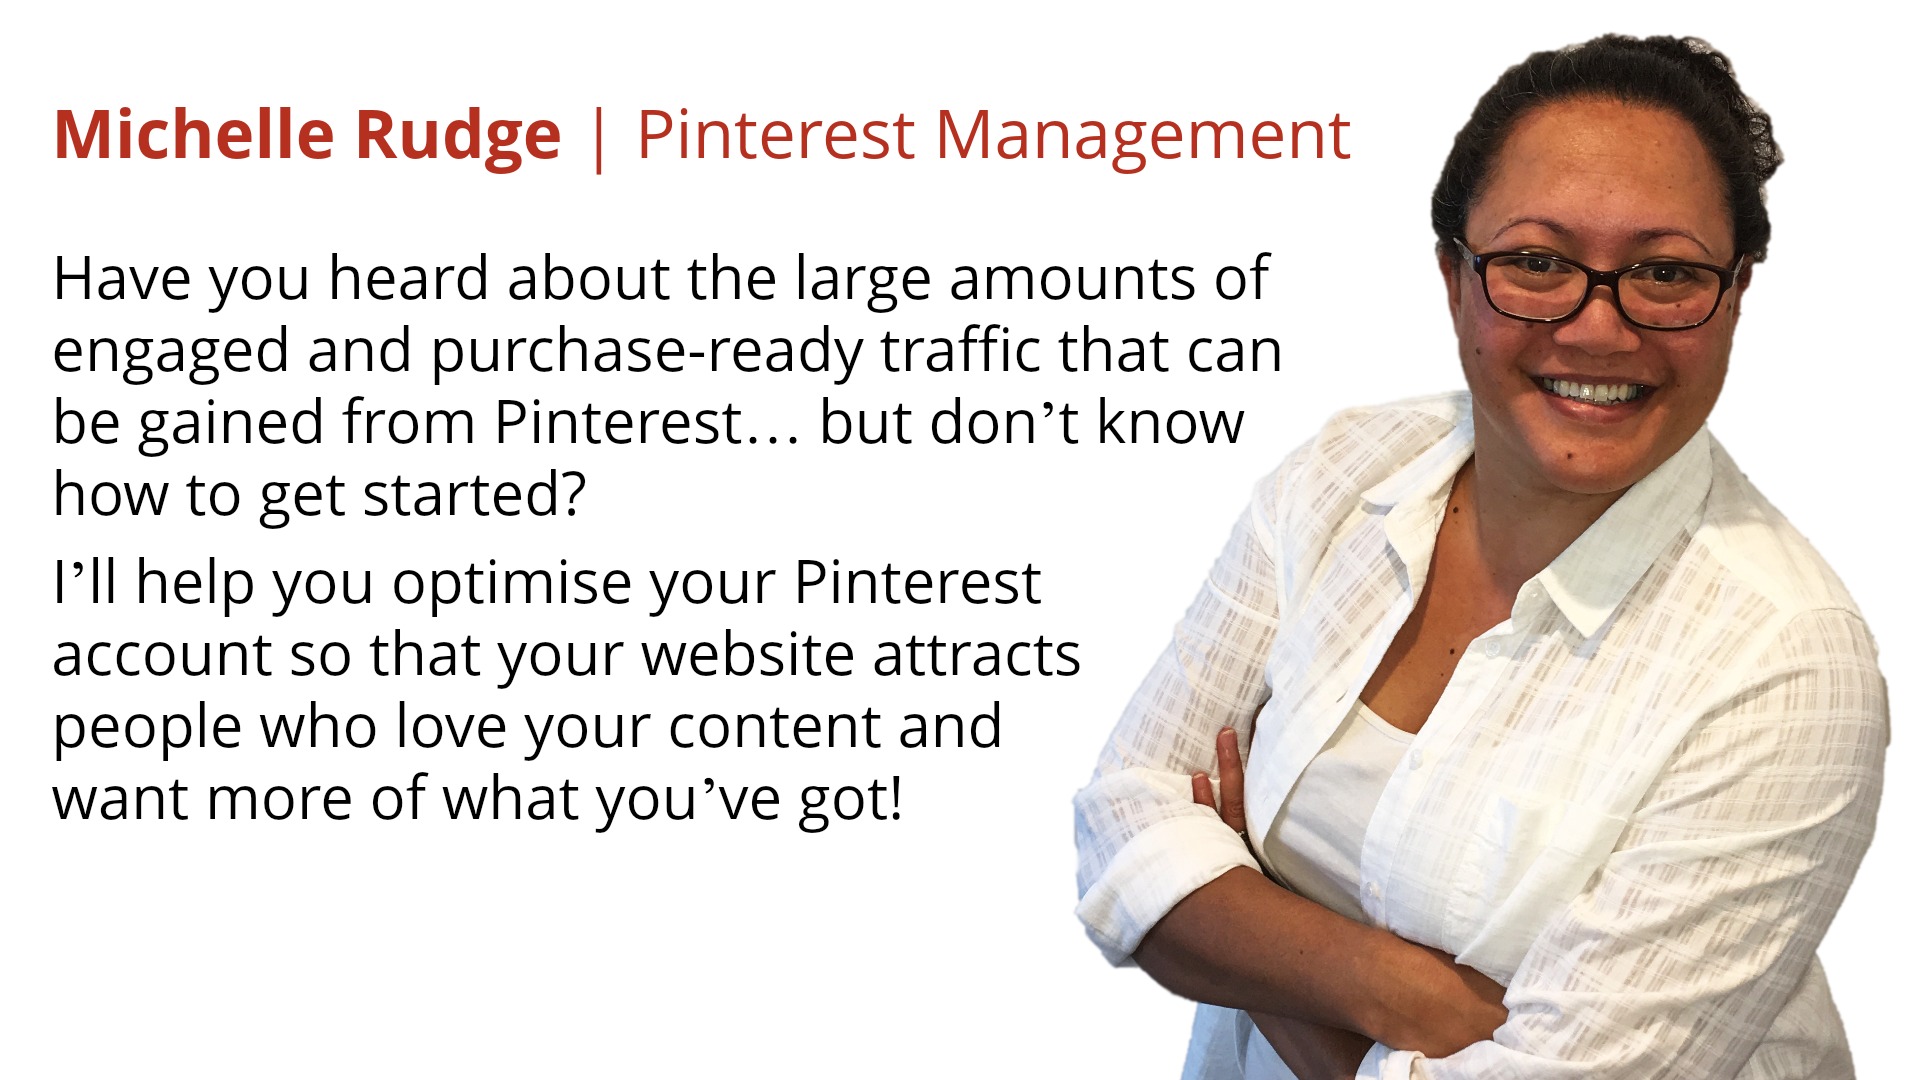 MichelleRudge.com | Pinterest Management Services - I help businesses and bloggers to drive traffic to their websites via the Pinterest platform.